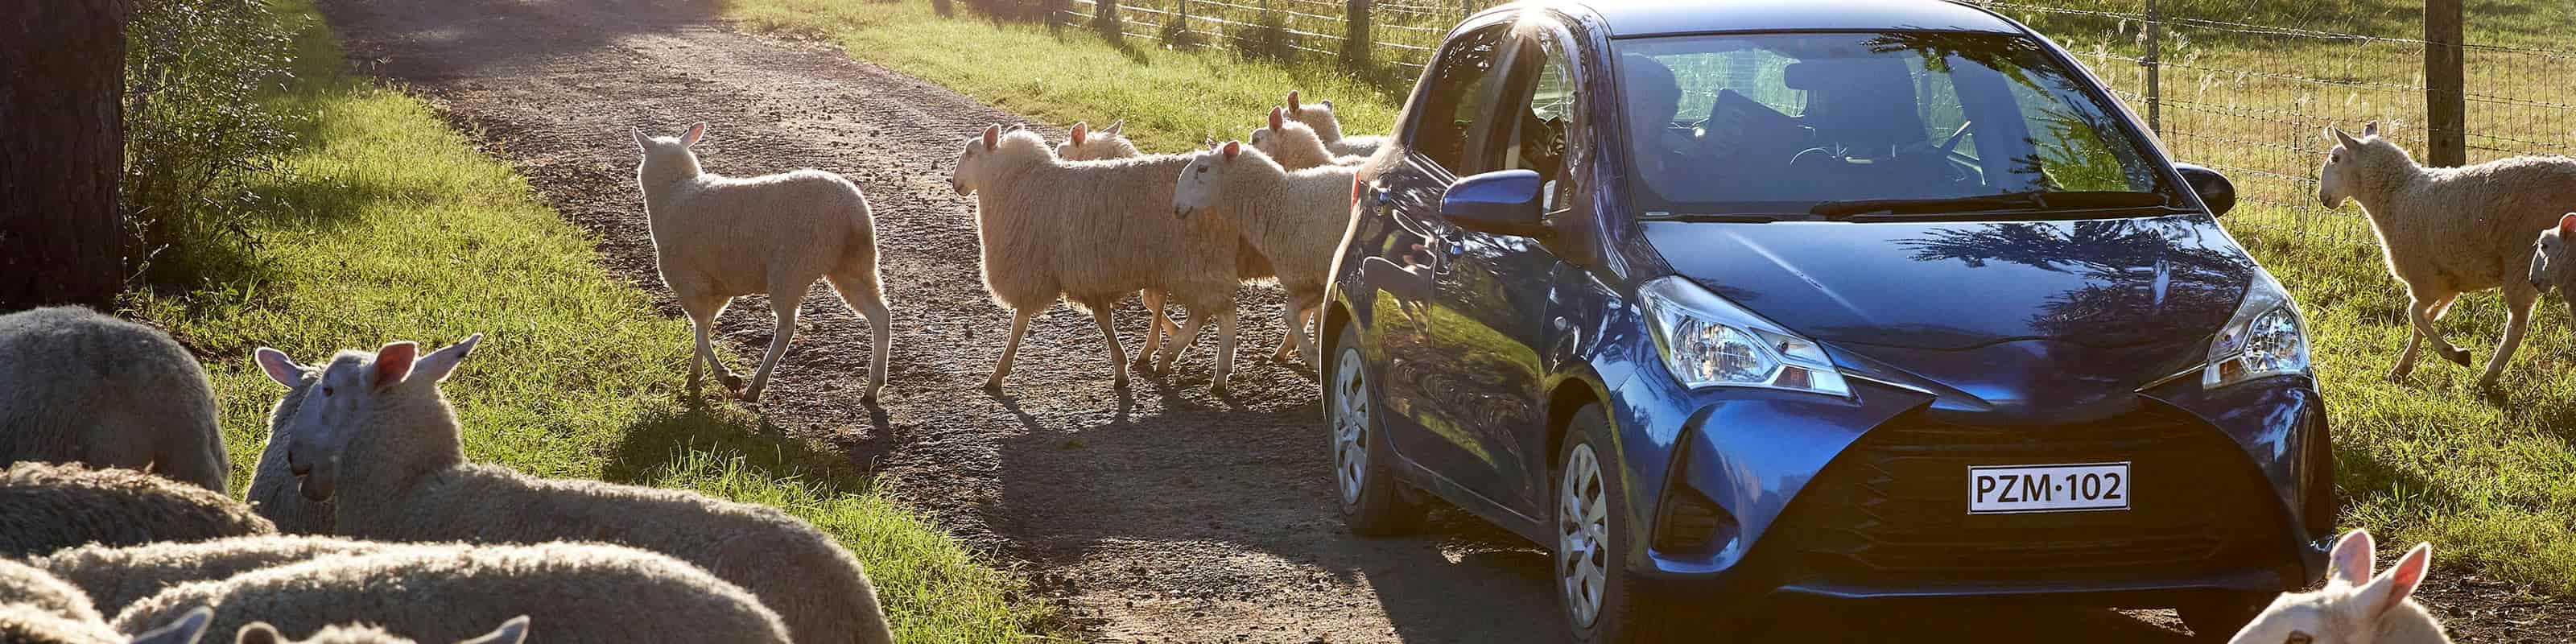 blue hatch driving down rural dirt road while sheep are crossing